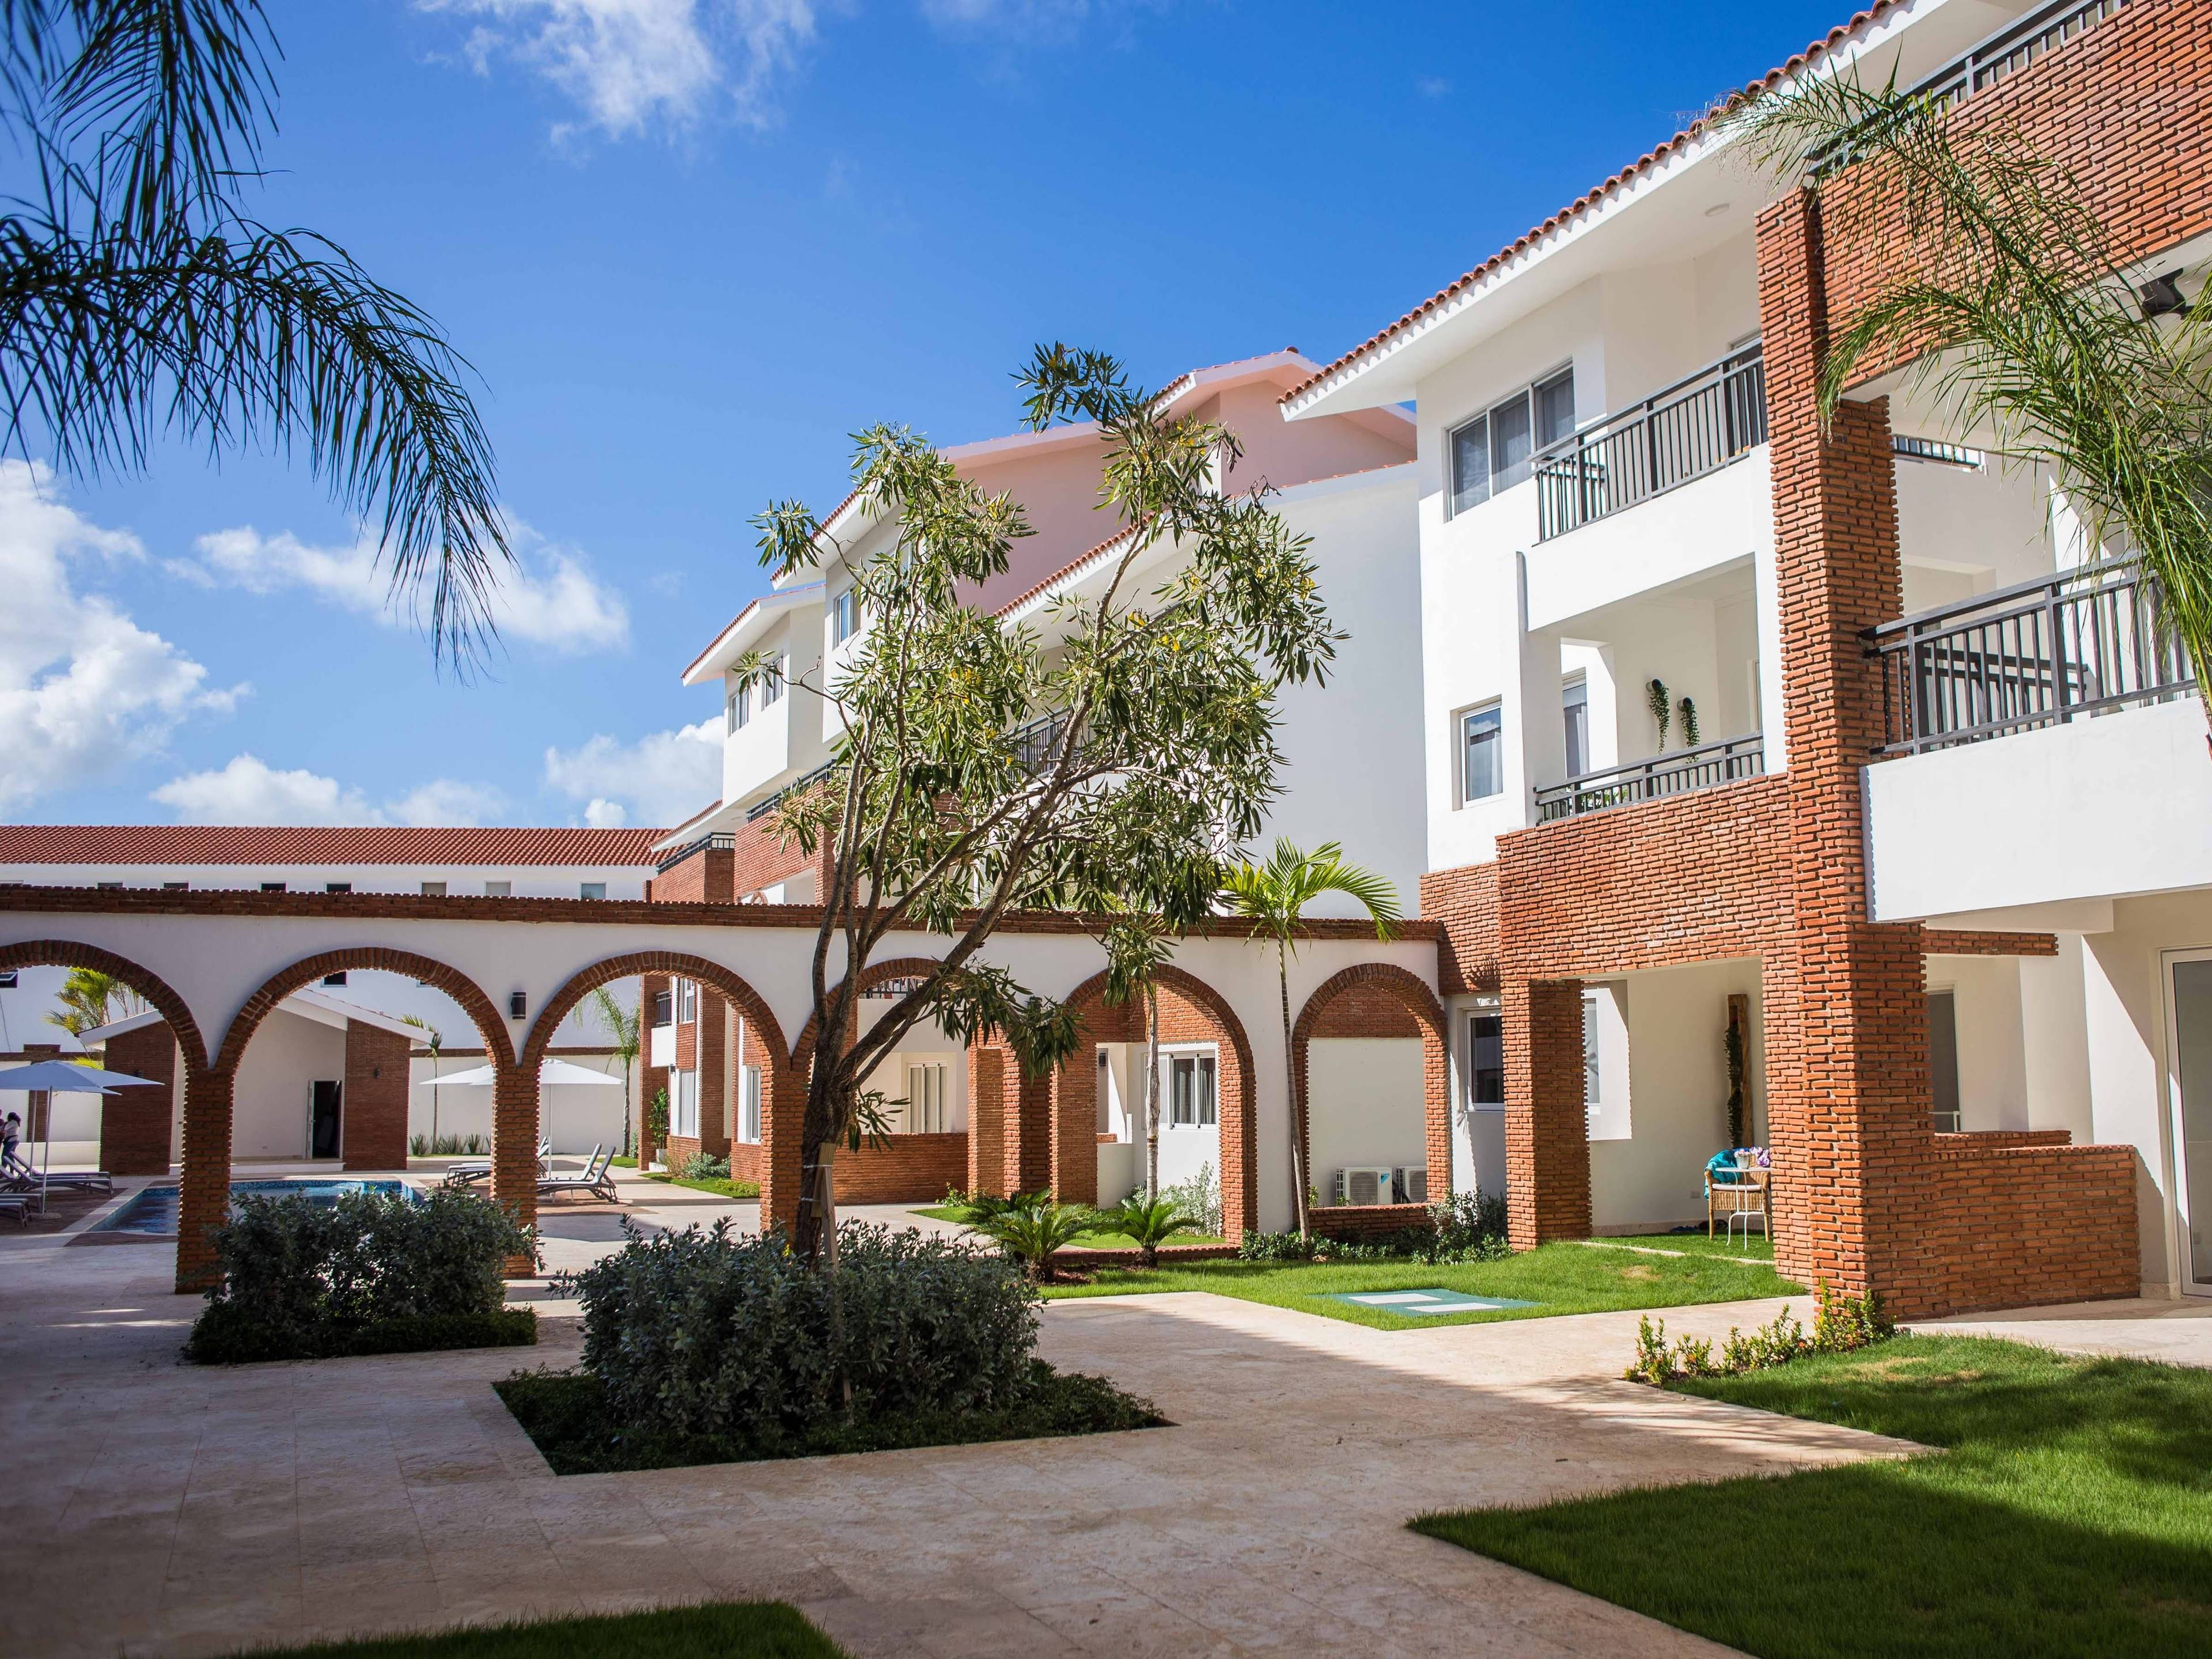 CONDOS IN THE HEART OF PUNTA CANA